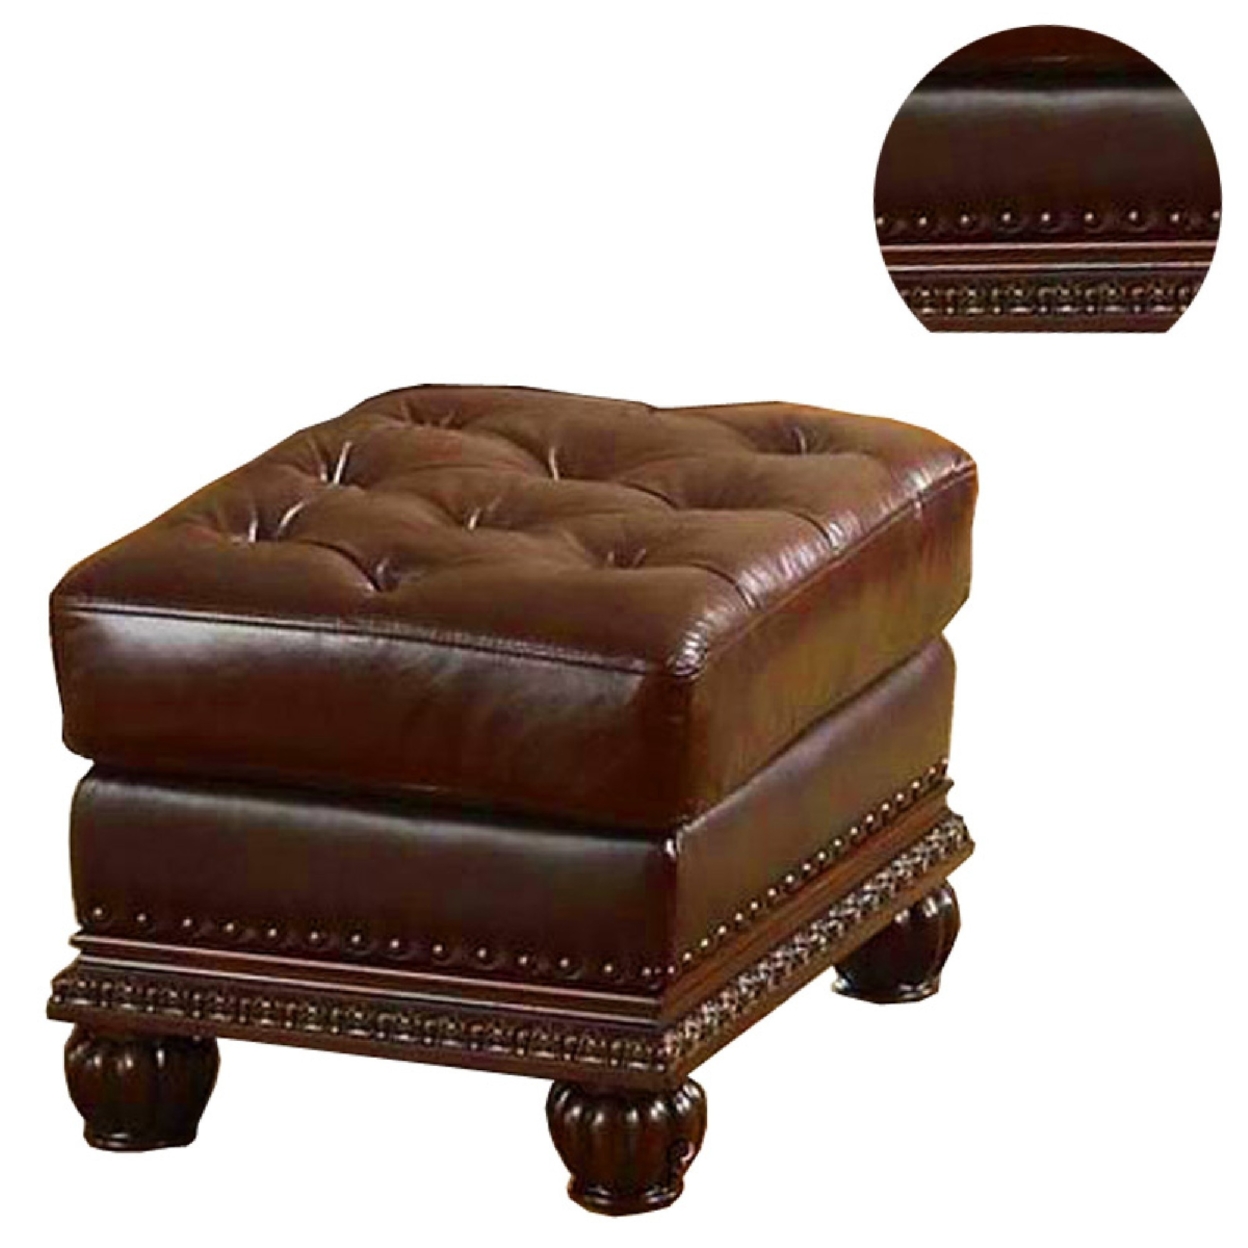 Faux Leather Upholstered Ottoman With Nail Head Trim Detail, Espresso Brown- Saltoro Sherpi